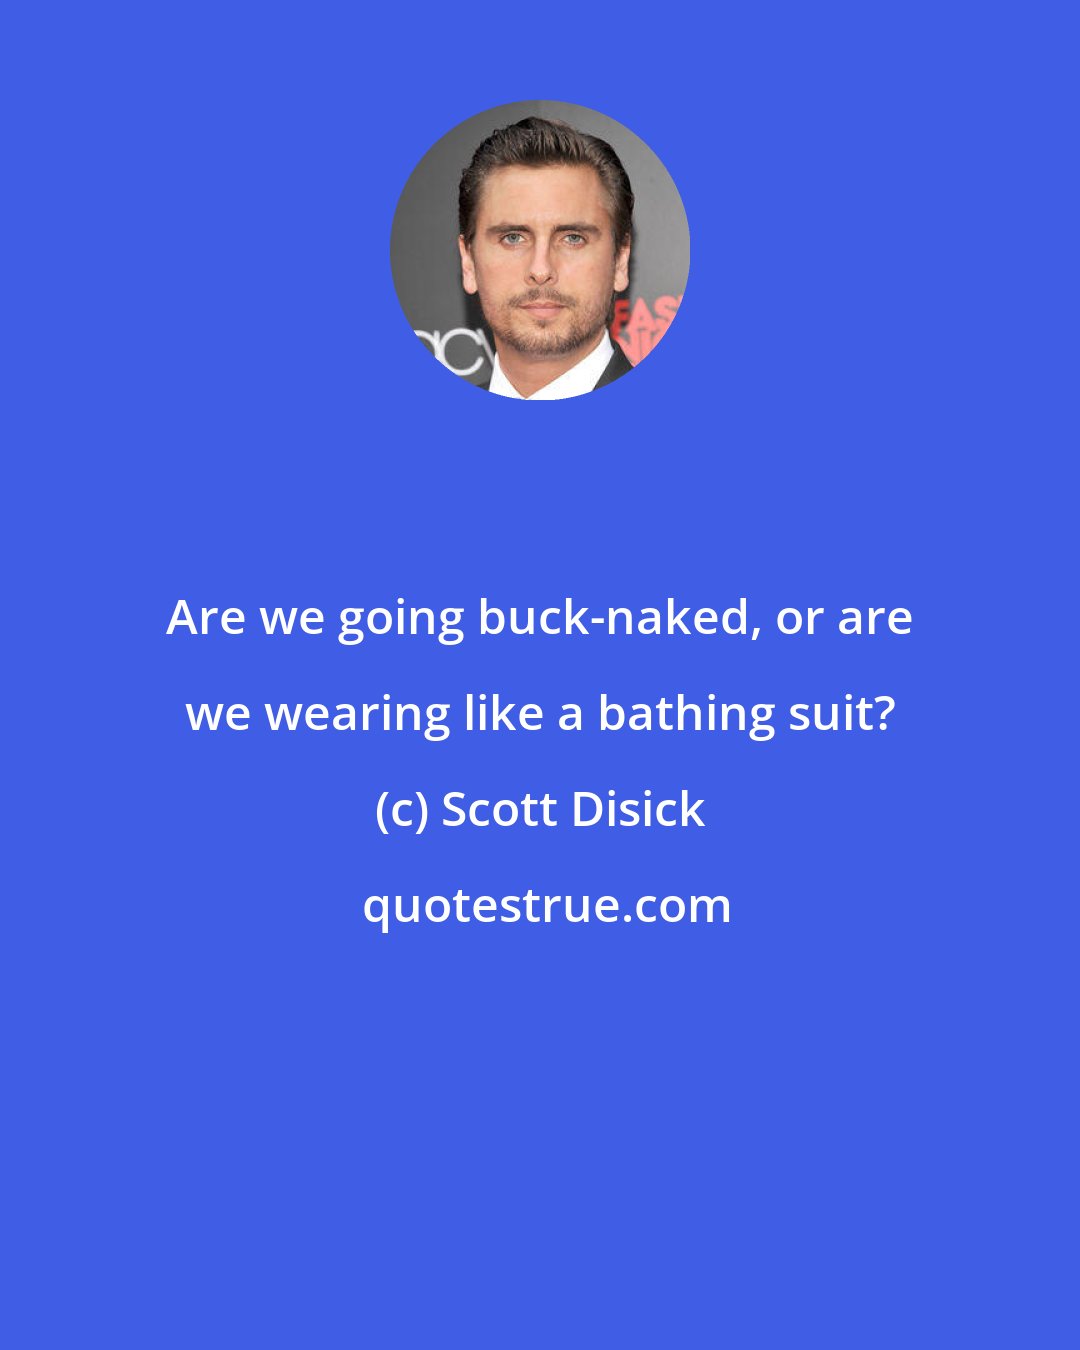 Scott Disick: Are we going buck-naked, or are we wearing like a bathing suit?